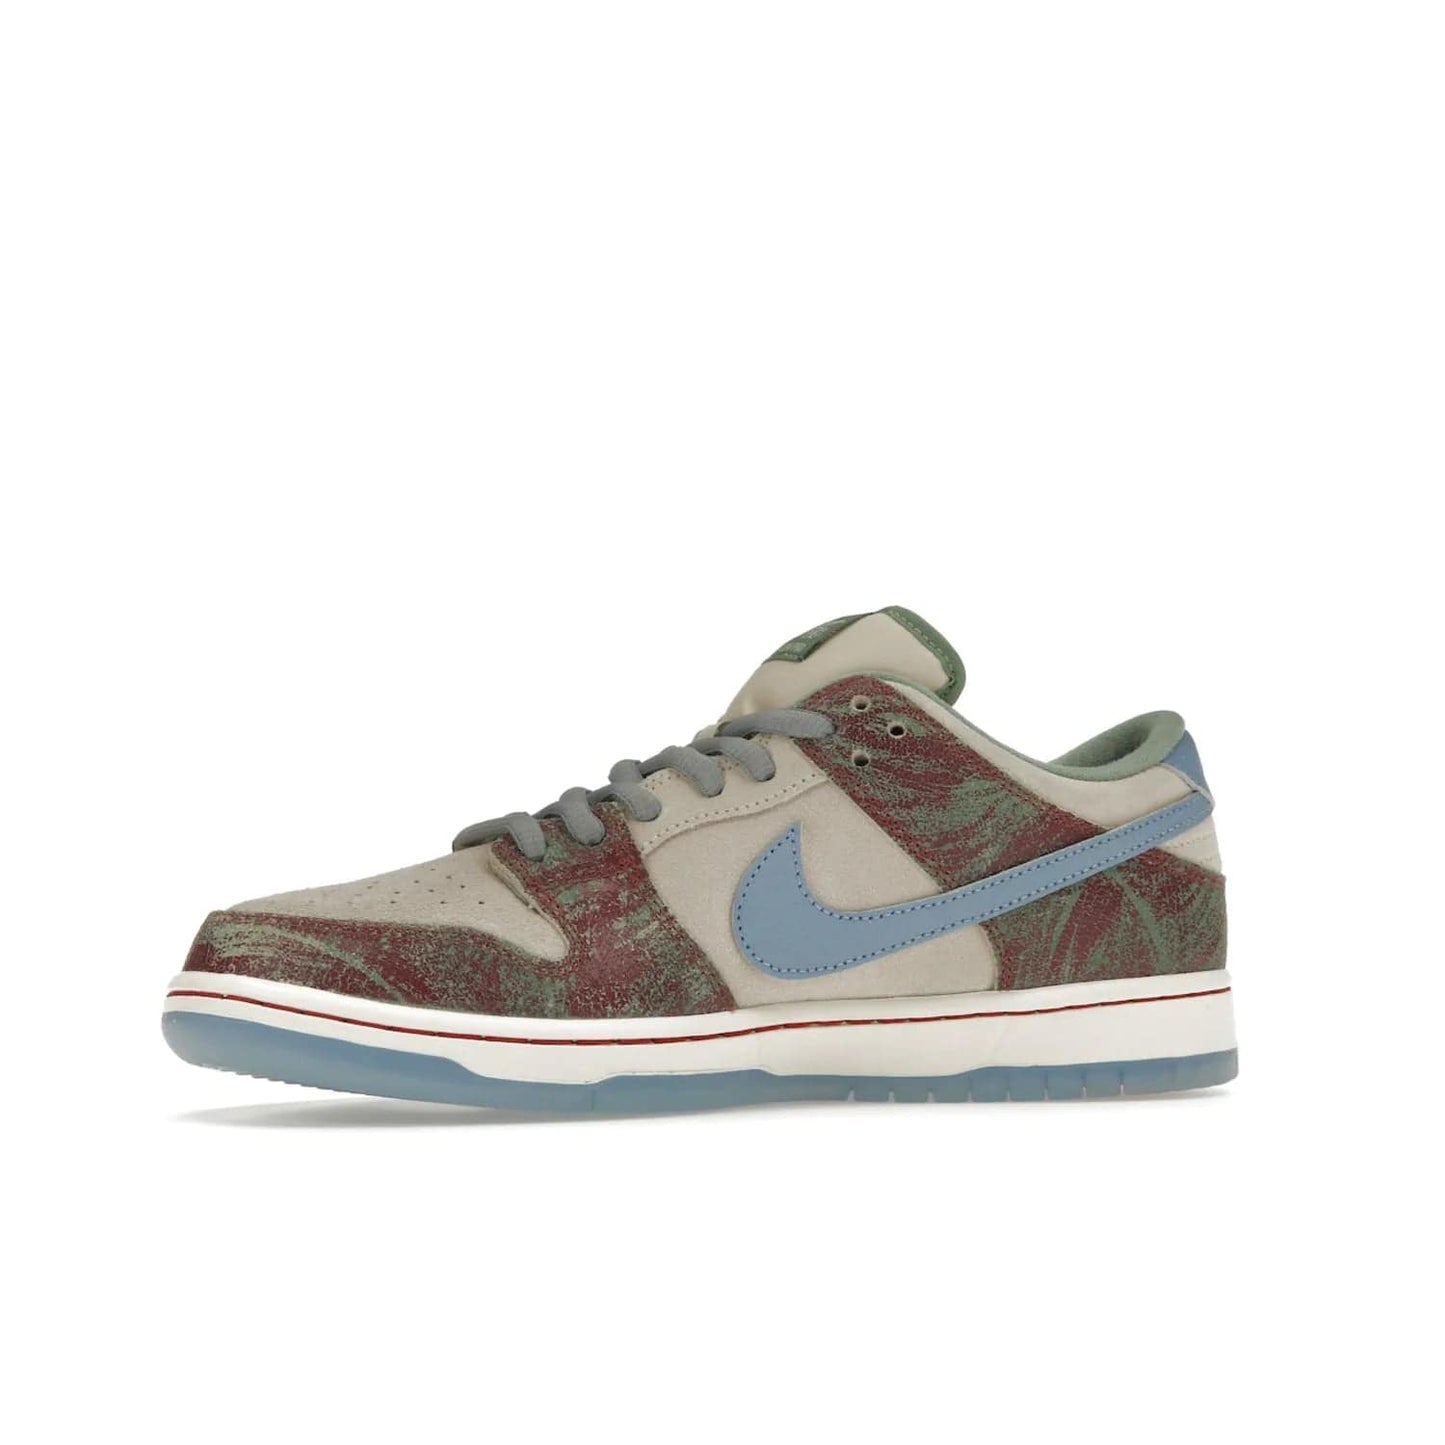 Nike SB Dunk Low Crenshaw Skate Club - Image 17 - Only at www.BallersClubKickz.com - Introducing the Nike SB Dunk Low Crenshaw Skate Club! Classic skate shoes with Sail and Light Blue upper, Cedar accents, padded collars and superior grip for comfortable, stable performance and style. Ideal for any skate session.